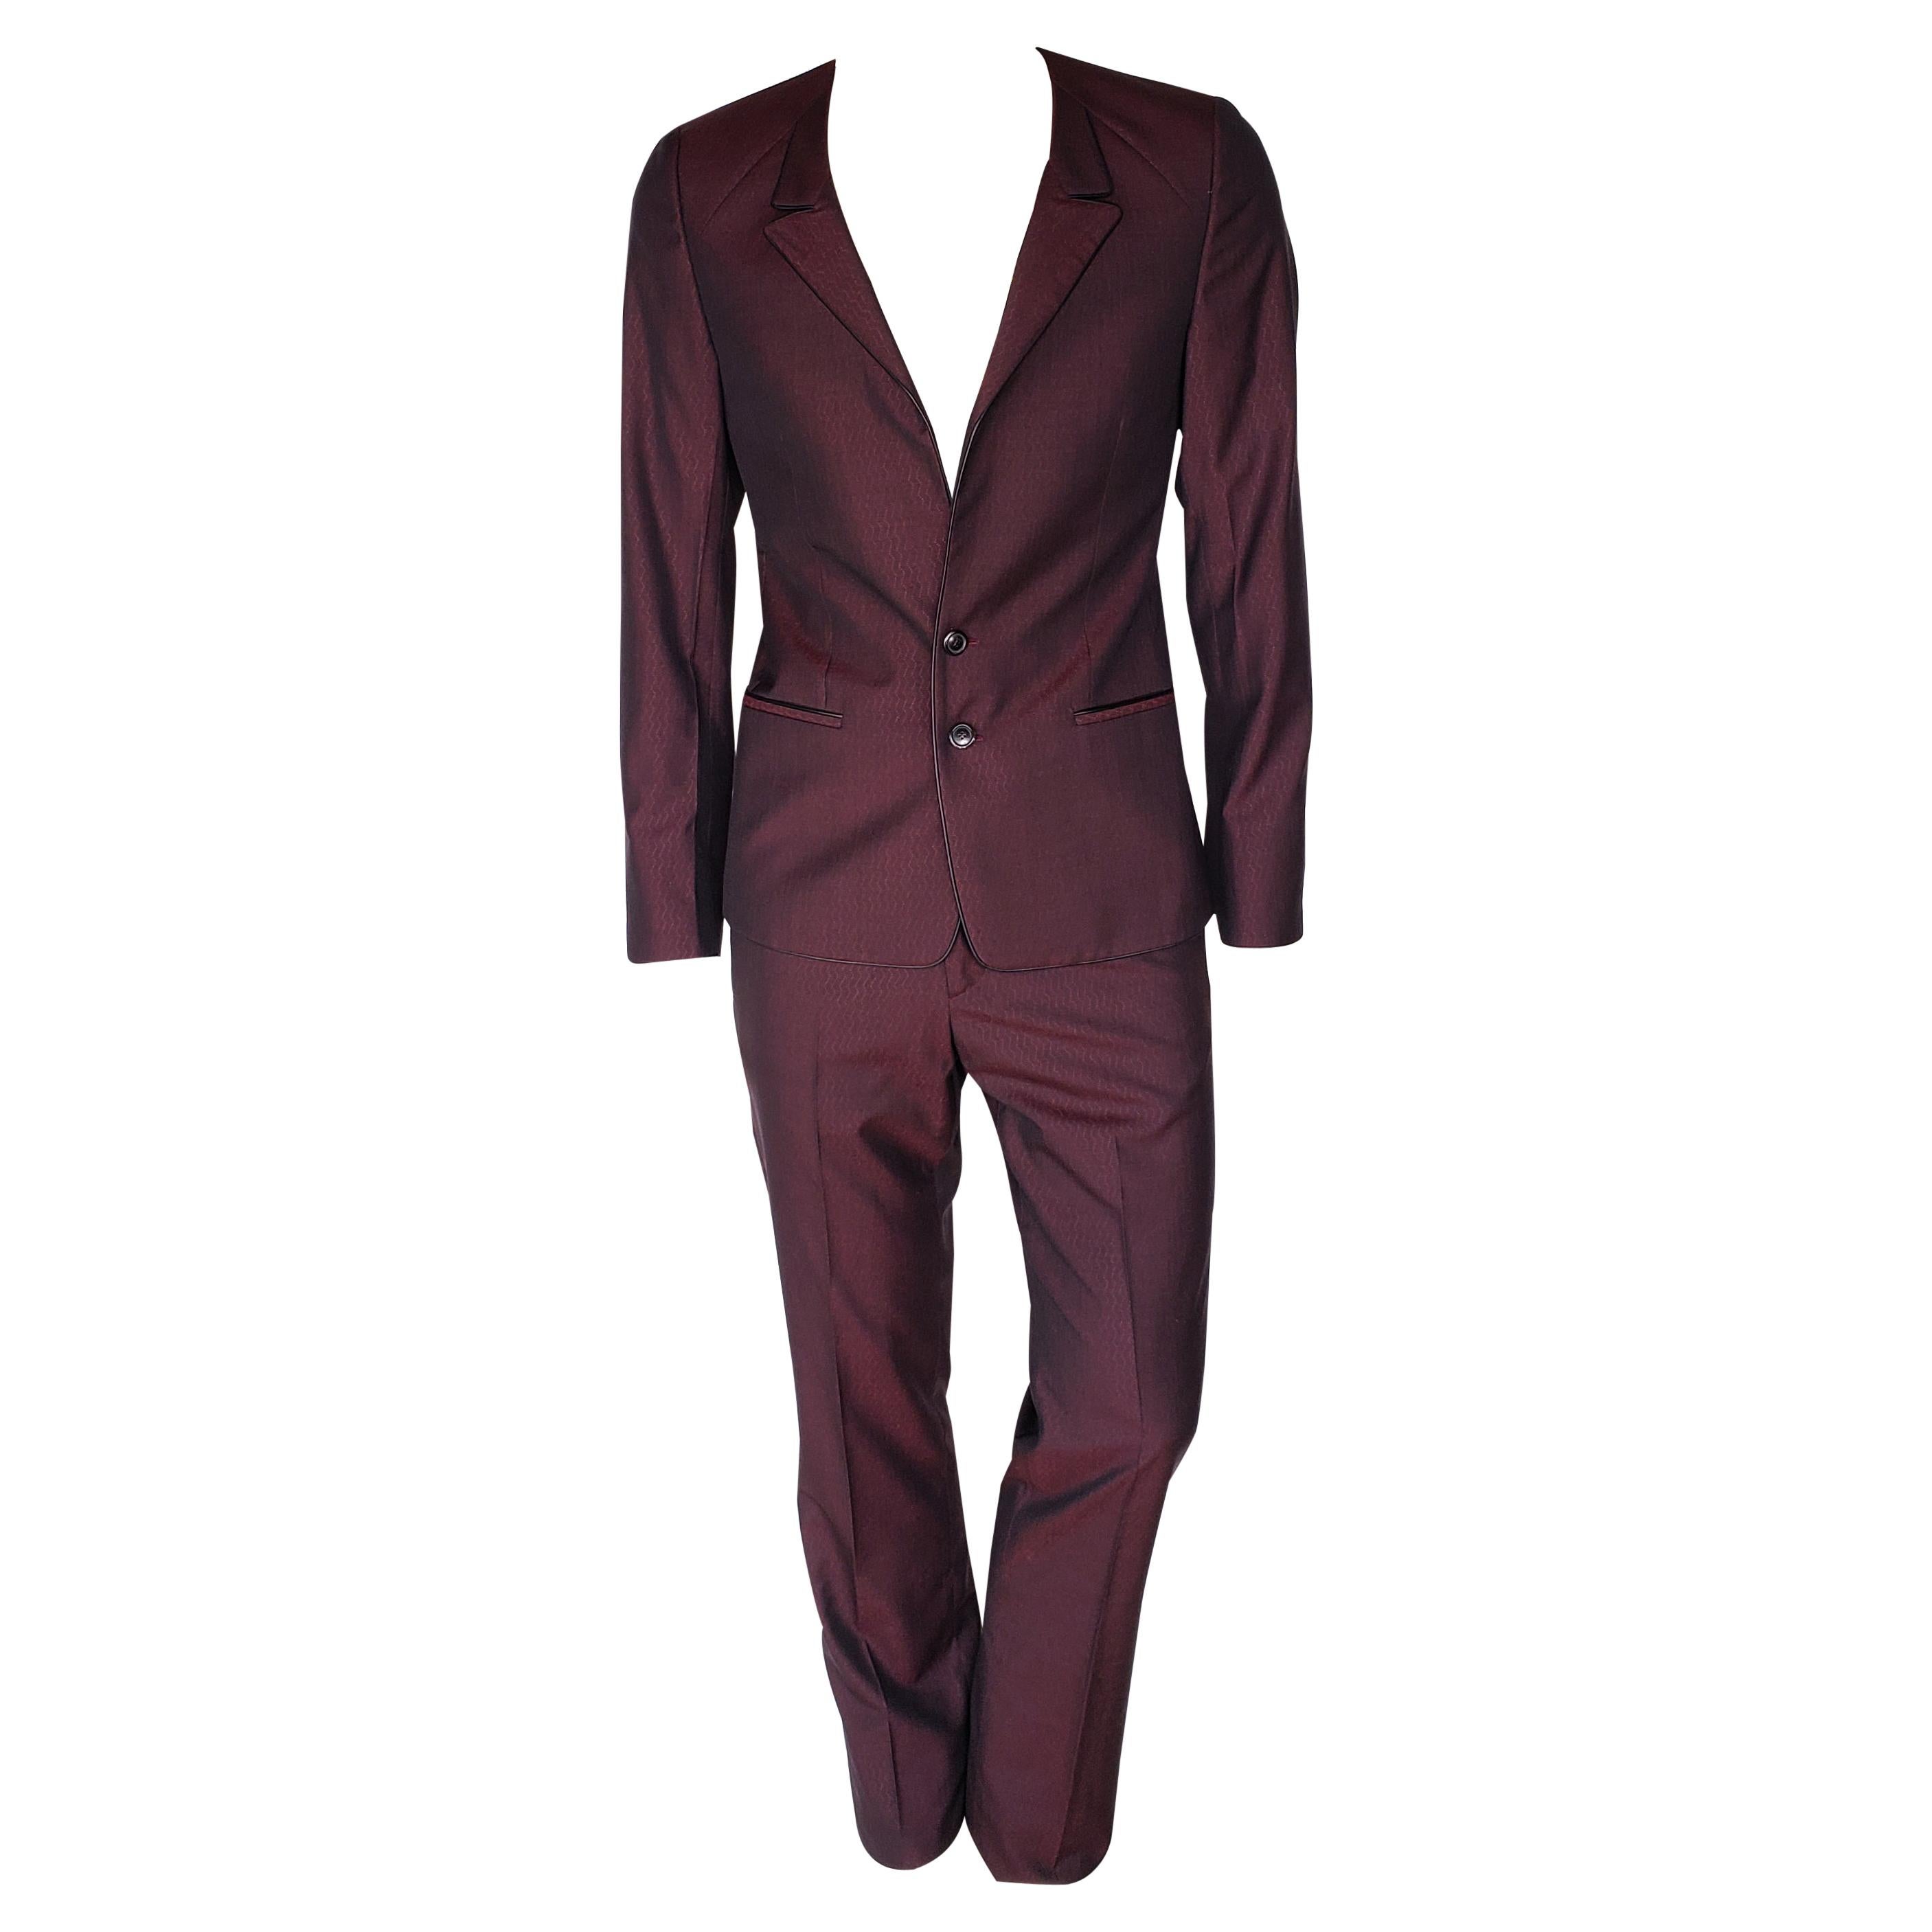 S/S 2011 look #19 NEW VERSACE BURGUNDY WOOL and SILK SUIT 48 - 38 (M) For Sale